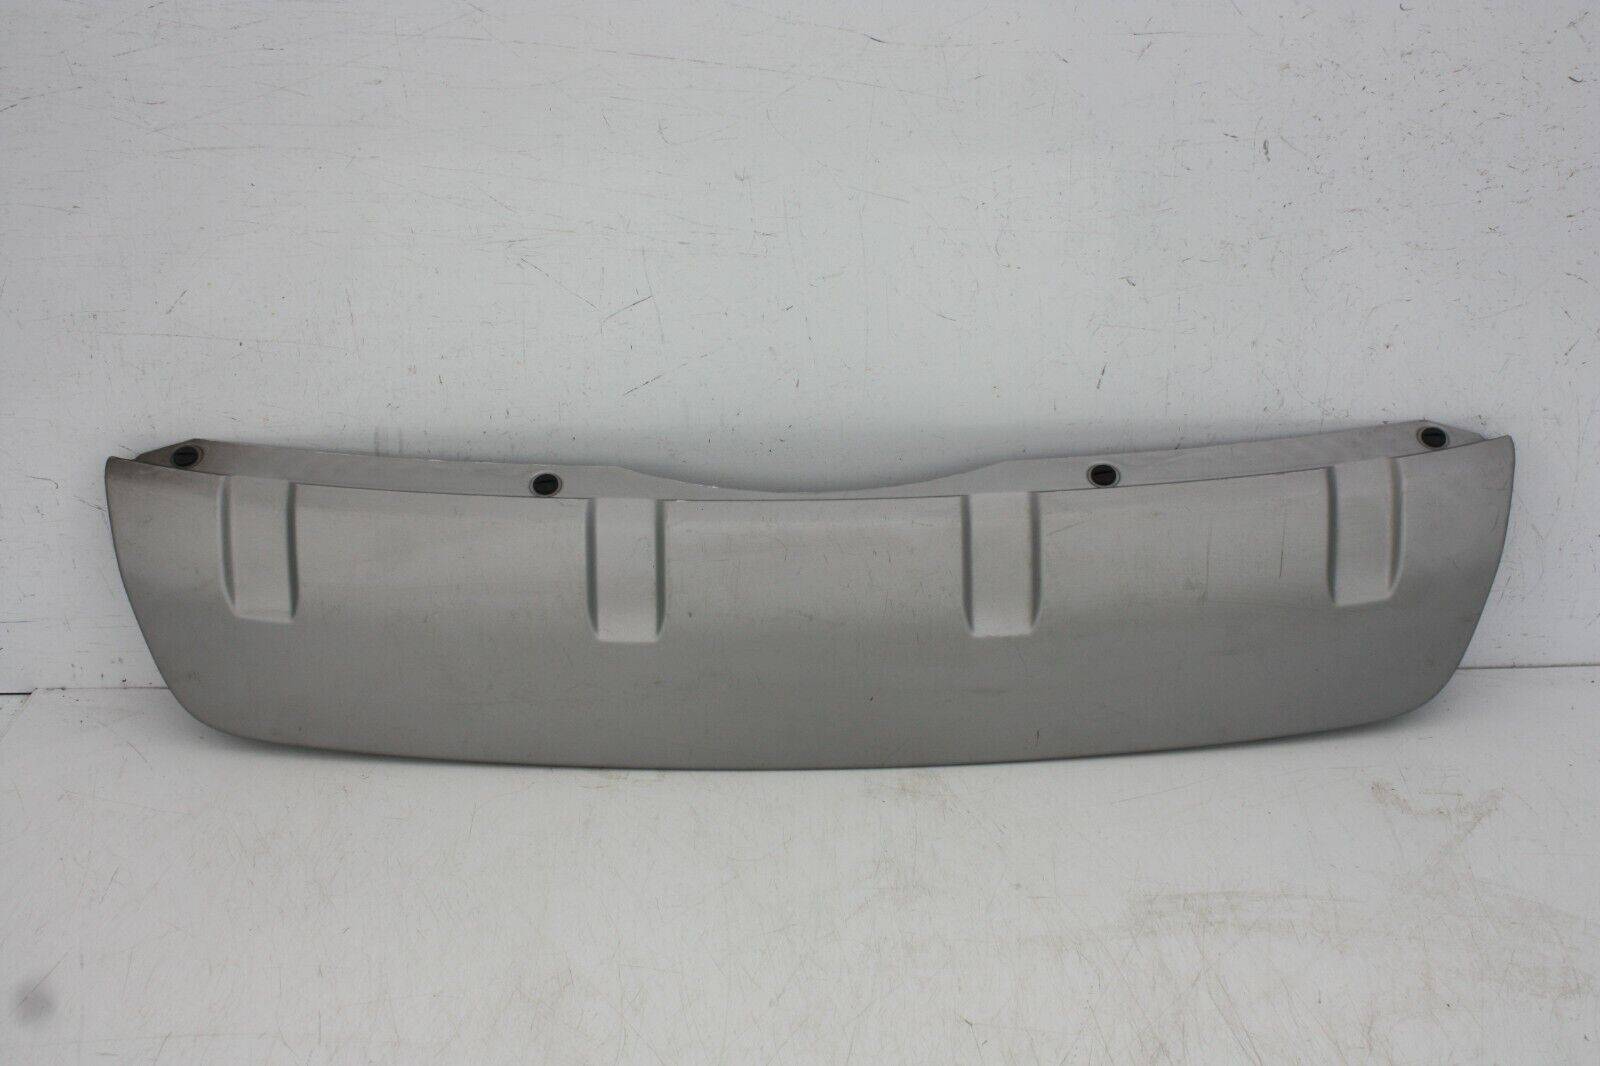 Land-Rover-Discovery-5-Rear-Bumper-Tow-Eye-Cover-2017-Onwards-Genuine-175367544144